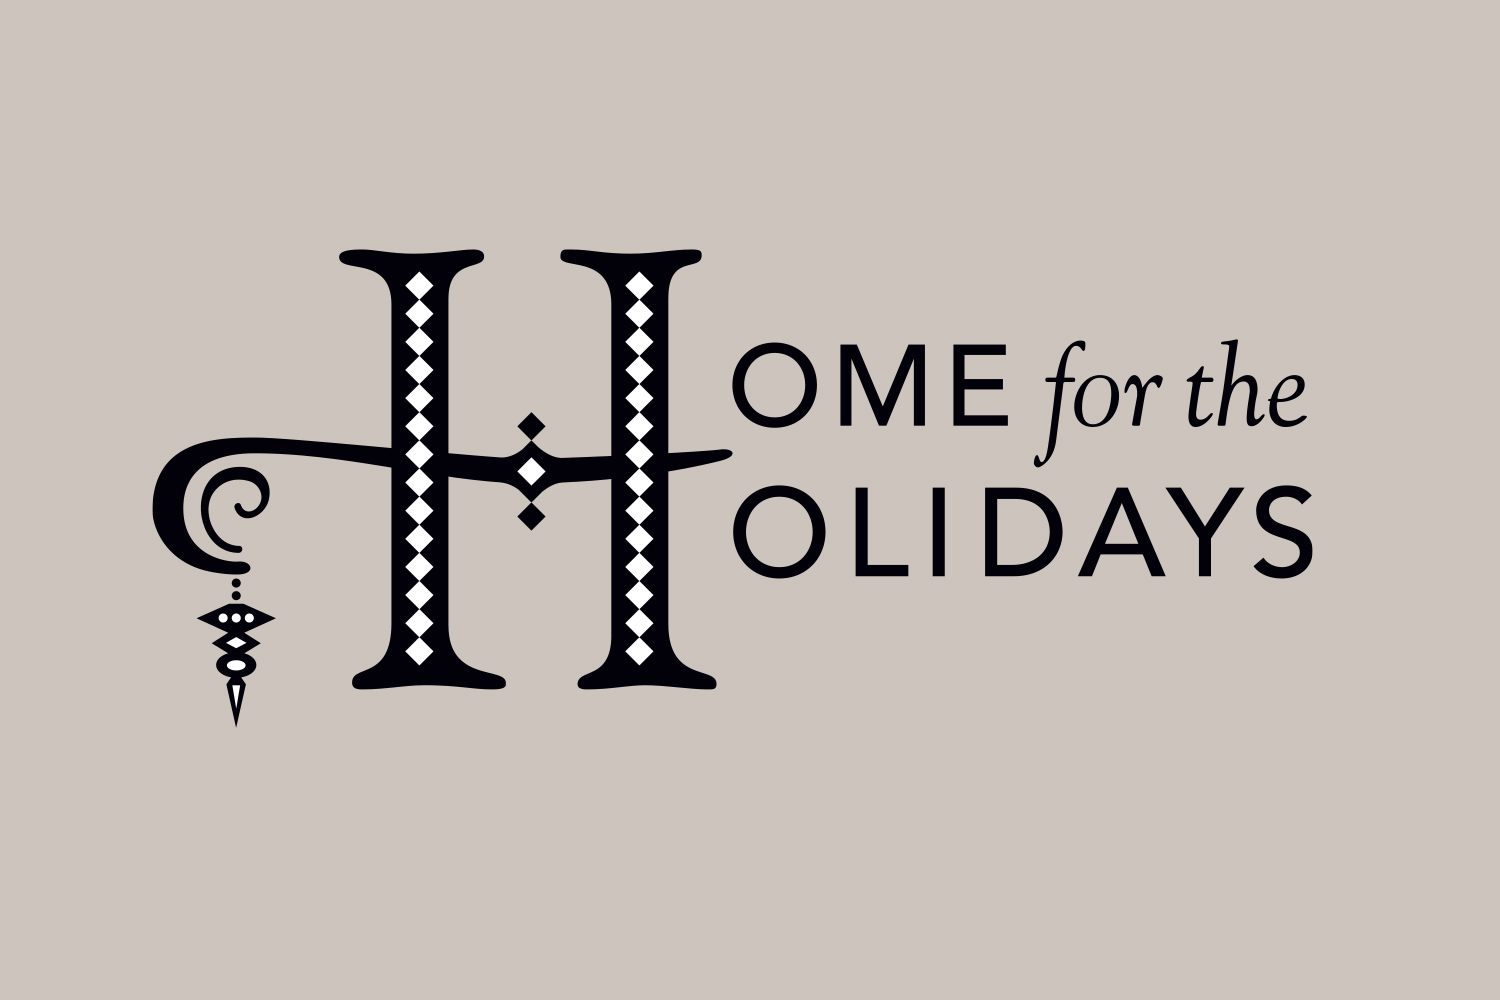 Home for the Holidays, 2009–2010